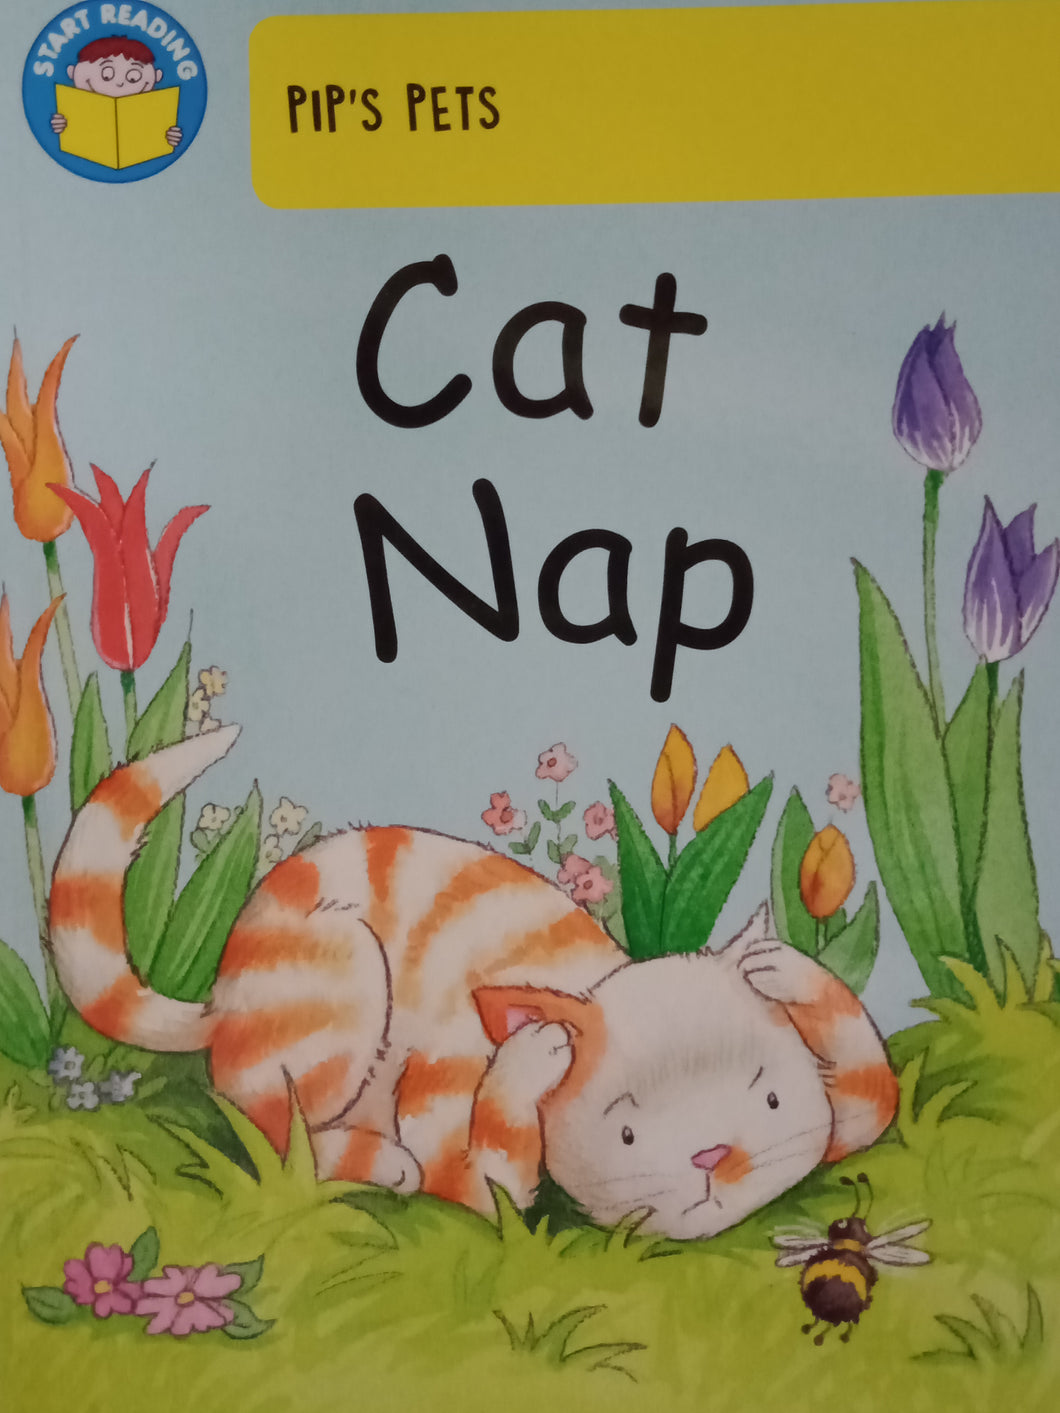 Pip's Pet: Cat Nap By Claire Llewellyn